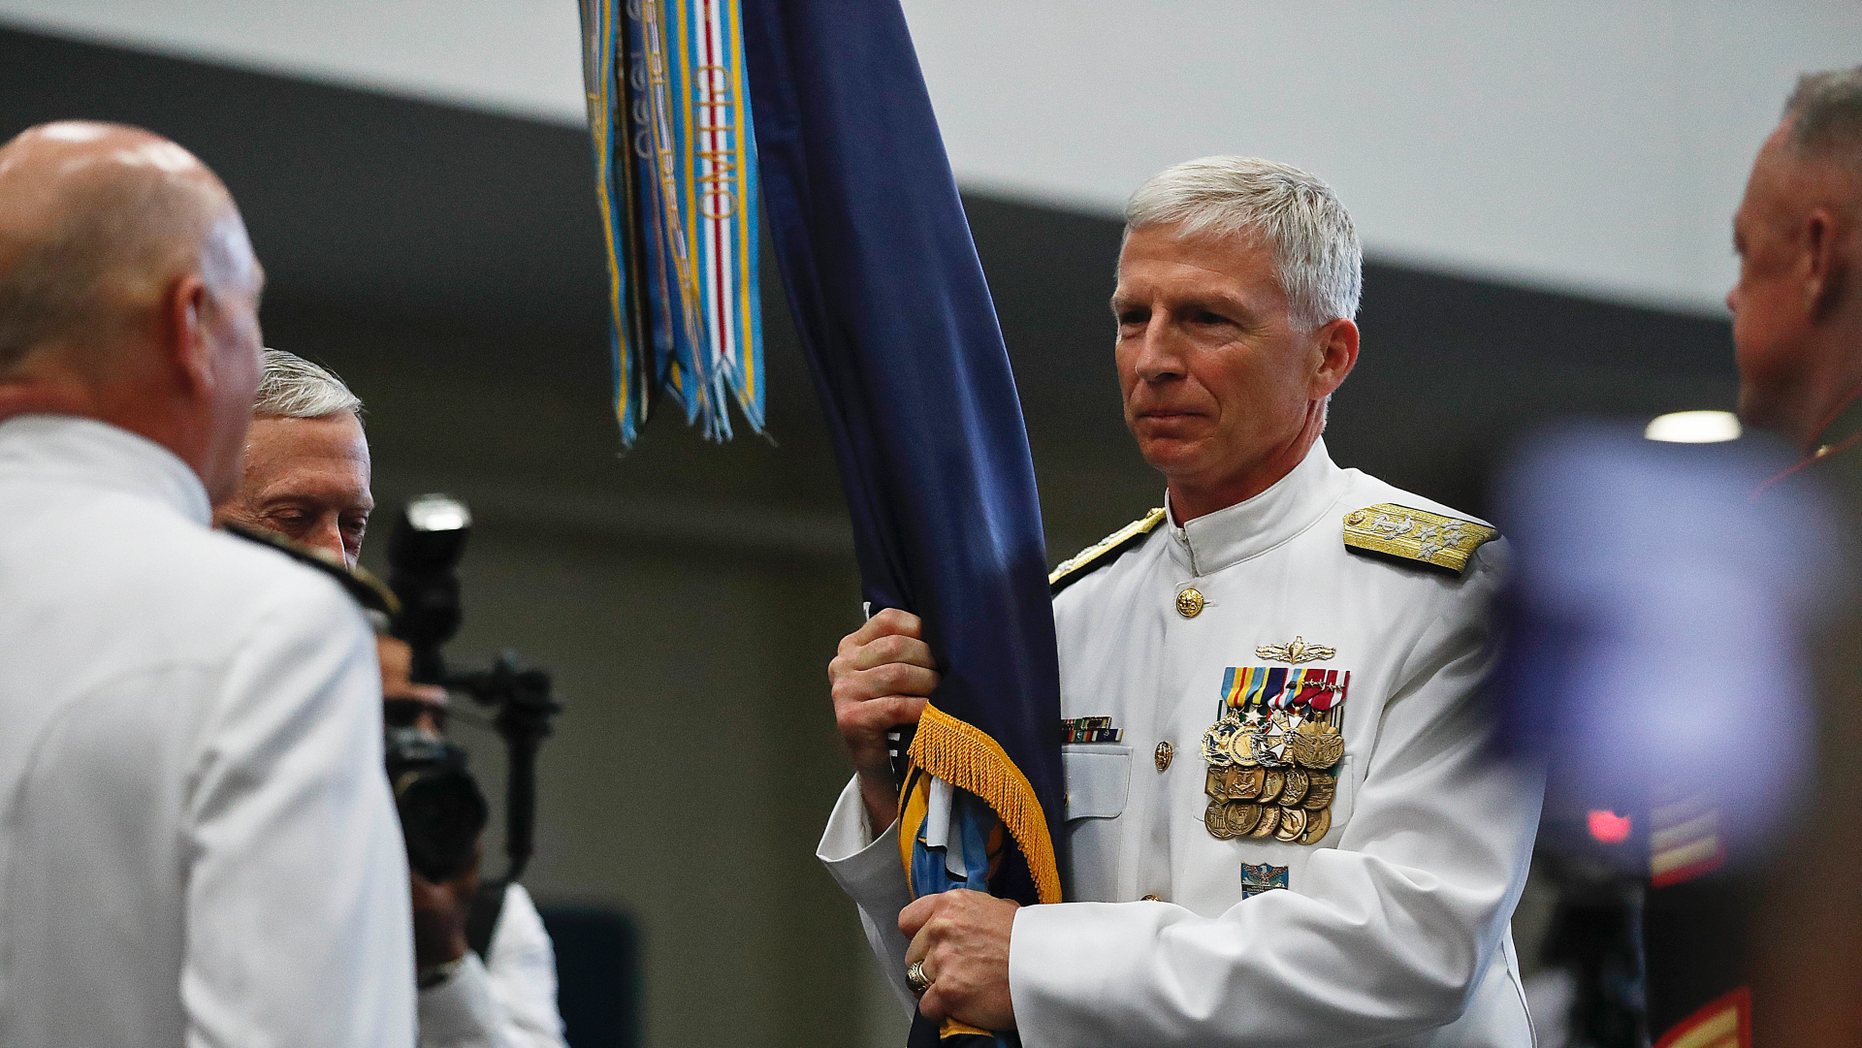 Admiral Craig Faller, in the center, takes command of Admiral Kurt Tidd, left, at a change of command ceremony at US Southern Command Headquarters on Monday, November 26, 2018, in Doral, Florida . (AP Photo / Brynn Anderson)